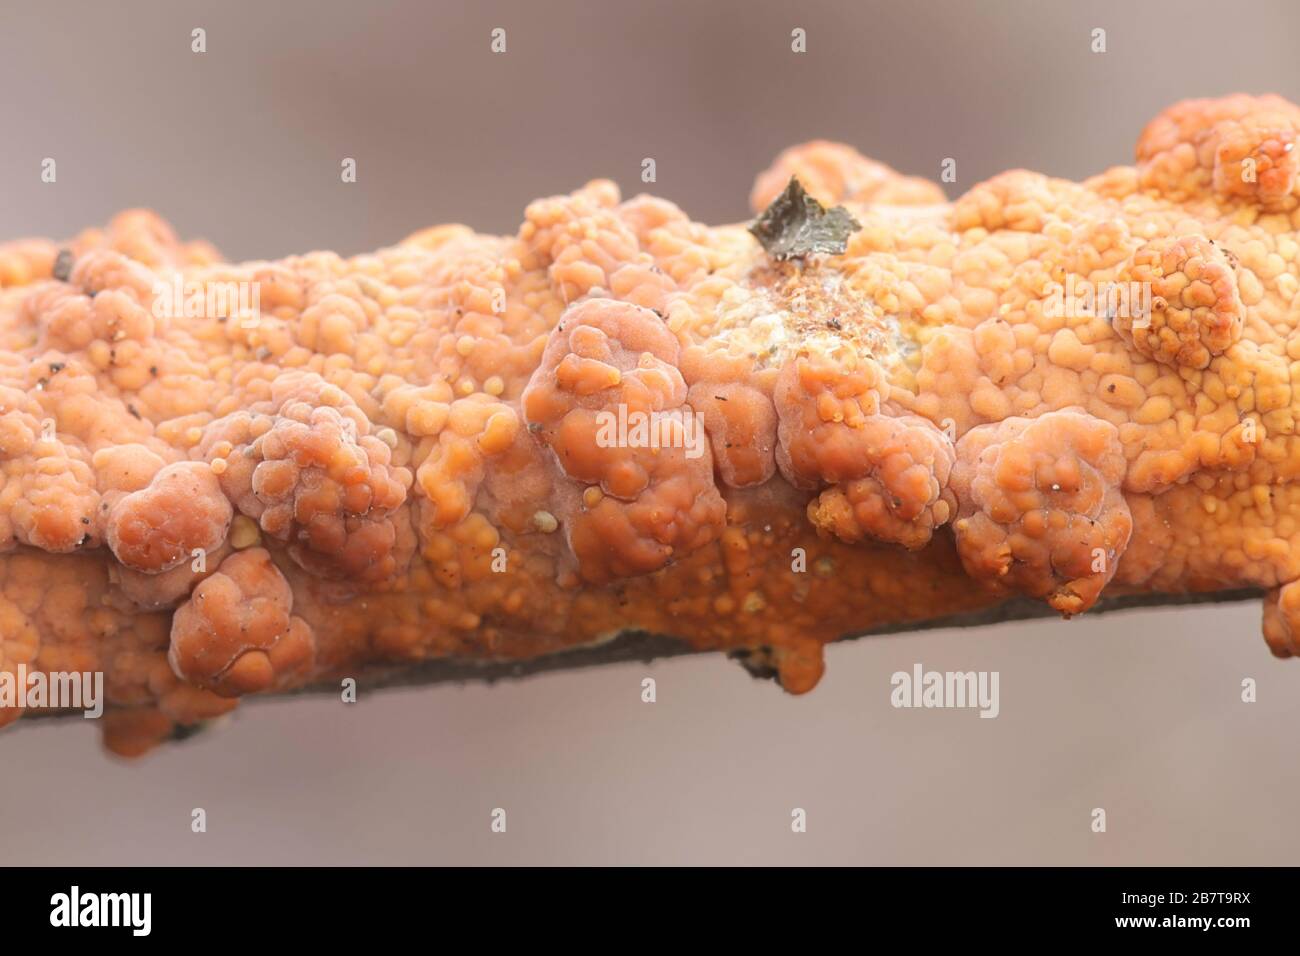 Peniophora incarnata, known as the rosy crust, wild fungus from Finland Stock Photo